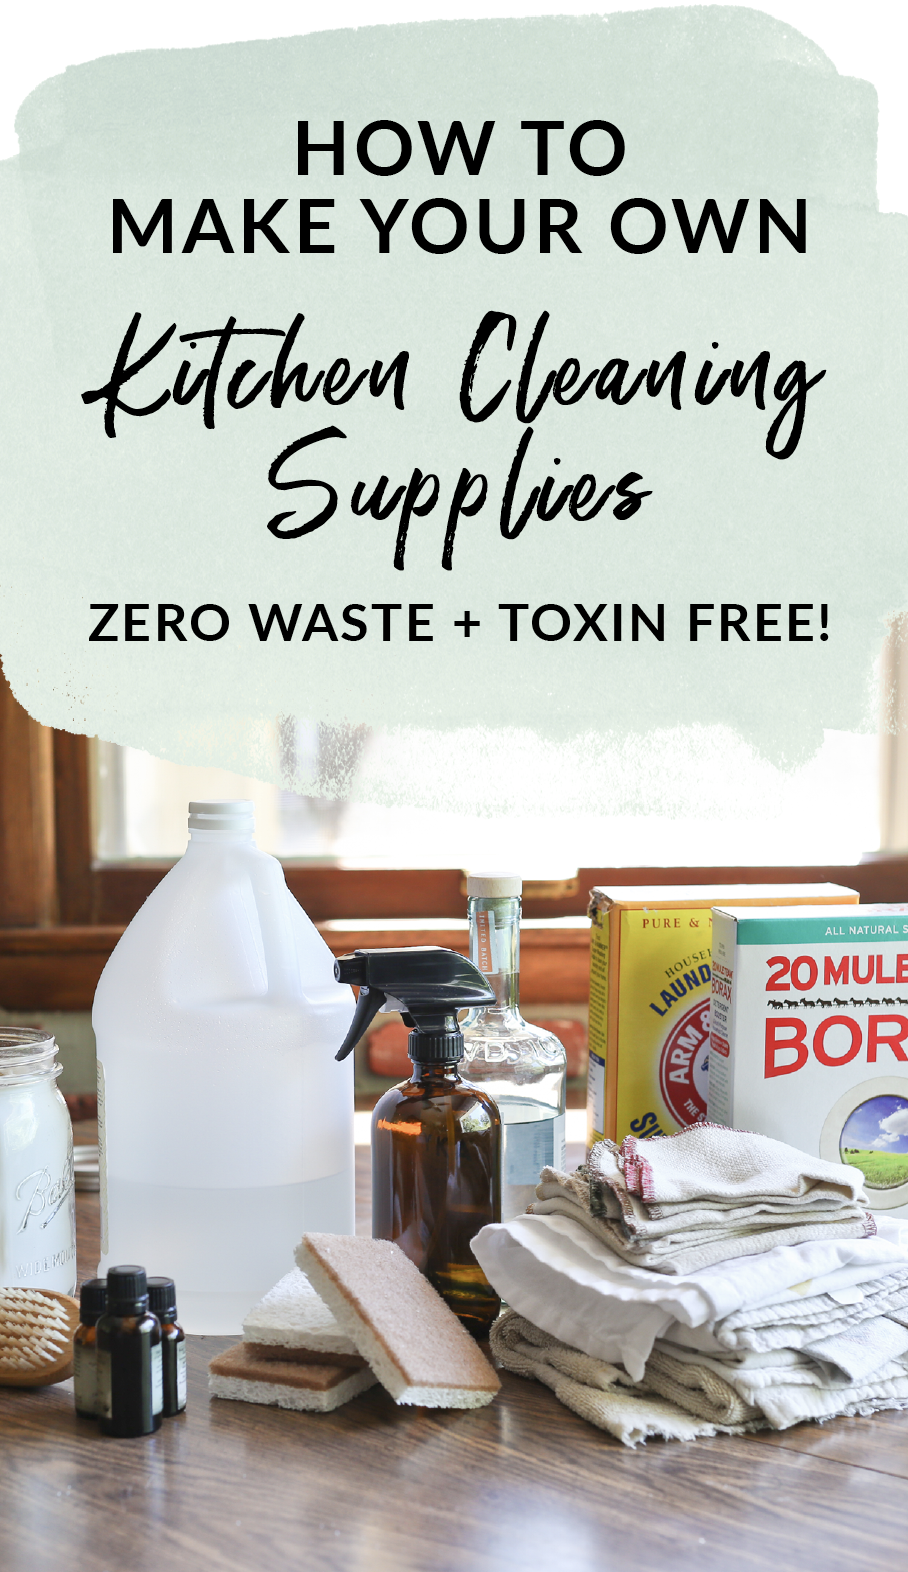 How To Make A Non-Toxic Soap Kitchen Cleaning Spray — Sustainably Lazy